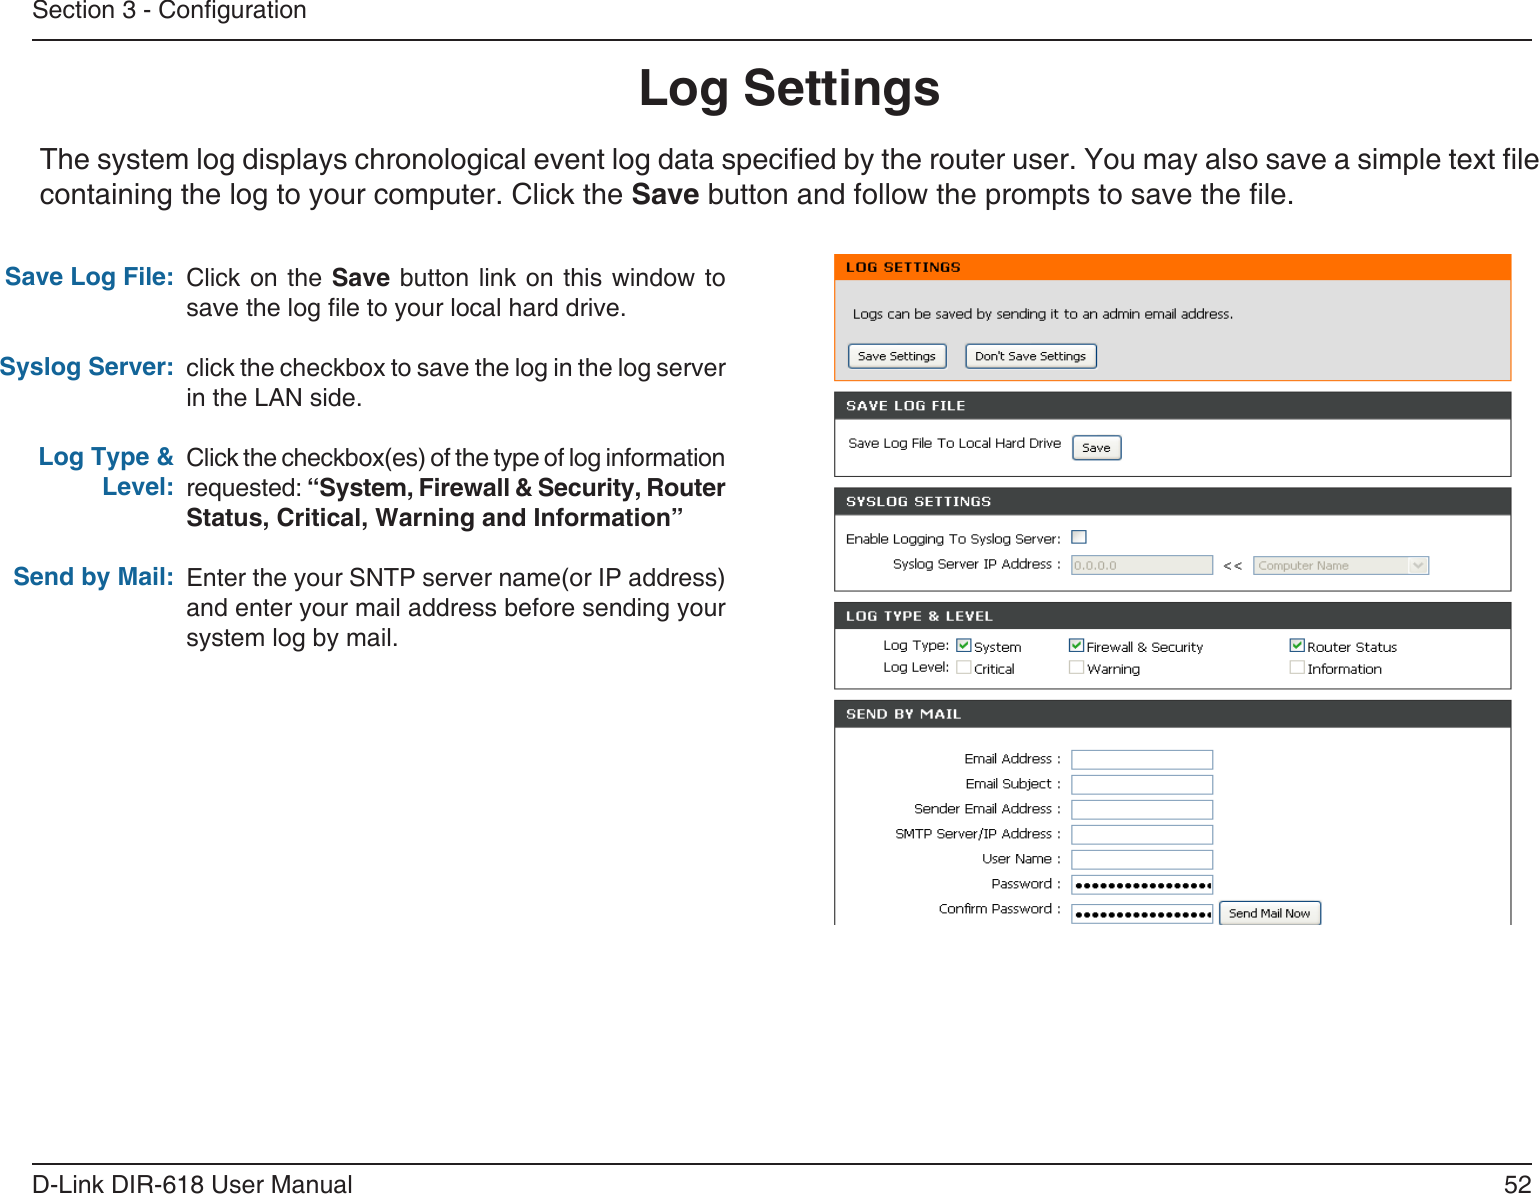 52D-Link DIR-618 User ManualSection 3 - CongurationLog SettingsClick on the Save button  link on  this window  tosave the log le to your local hard drive.click the checkbox to save the log in the log server in the LAN side.Click the checkbox(es) of the type of log information requested: “System, Firewall &amp; Security, Router Status, Critical, Warning and Information”Enter the your SNTP server name(or IP address)and enter your mail address before sending yoursystem log by mail.Save Log File:Syslog Server:Log Type &amp; Level:Send by Mail:The system log displays chronological event log data specied by the router user. You may also save a simple text le containing the log to your computer. Click the Save button and follow the prompts to save the le.